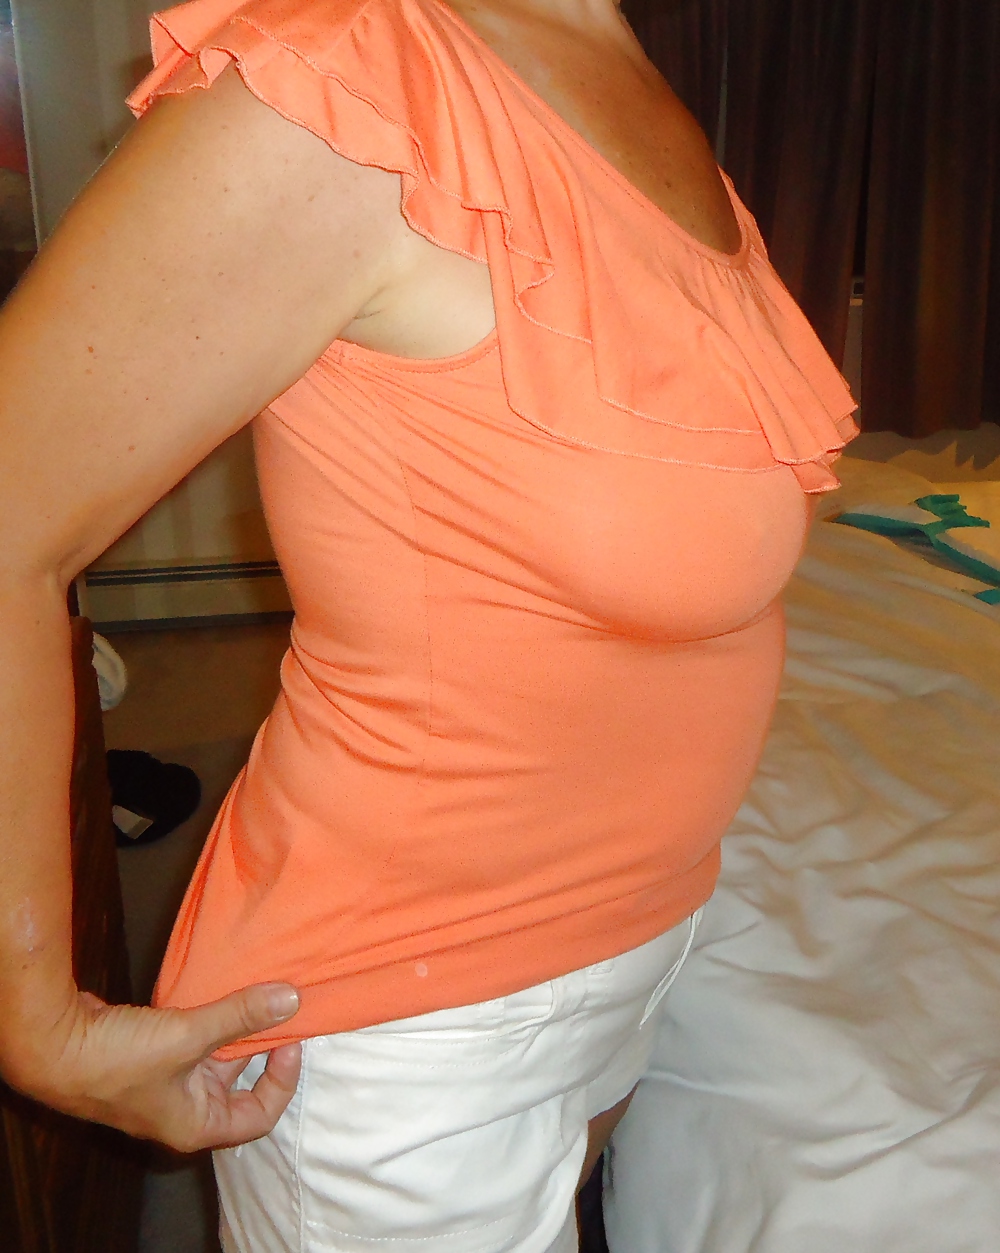 Wifes Nice Tits And Nipples In Shirt #18110666